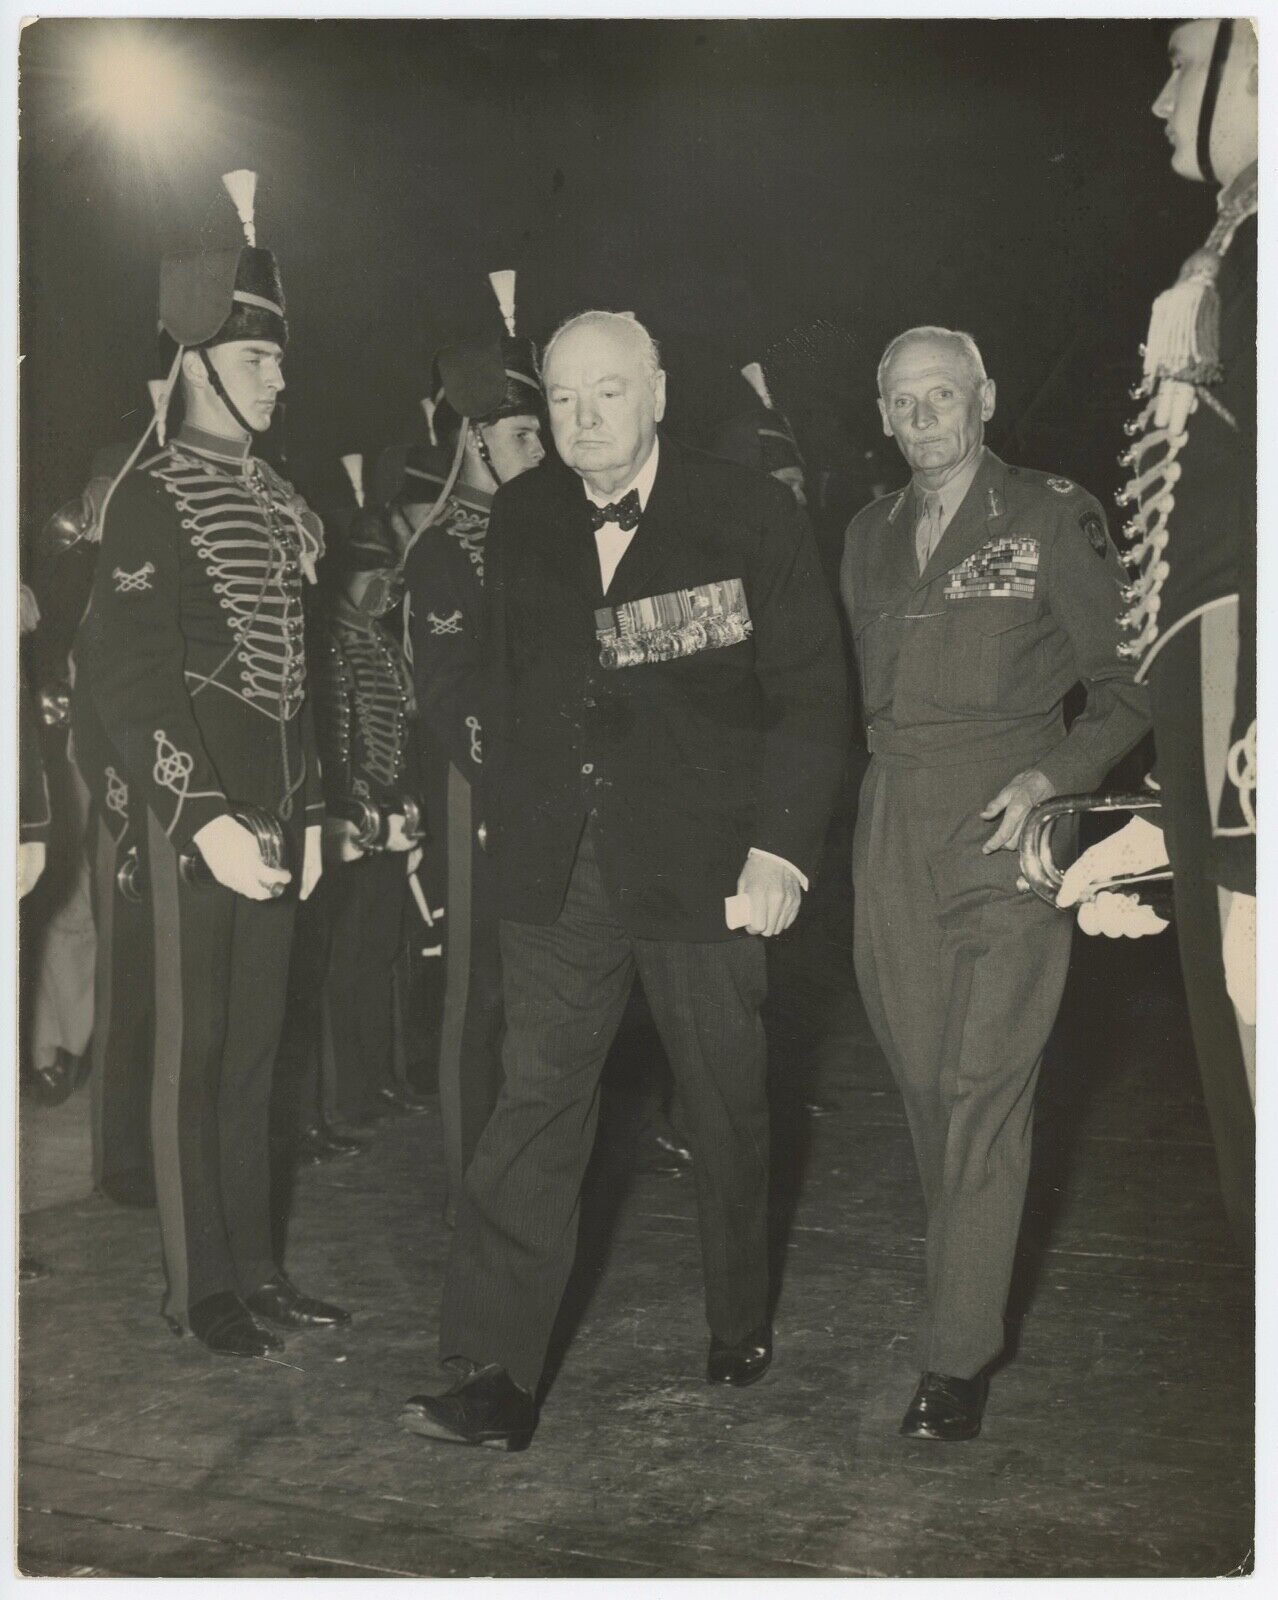 19 October 1951 photo of Churchill and Montgomery at the El Alamein reunion